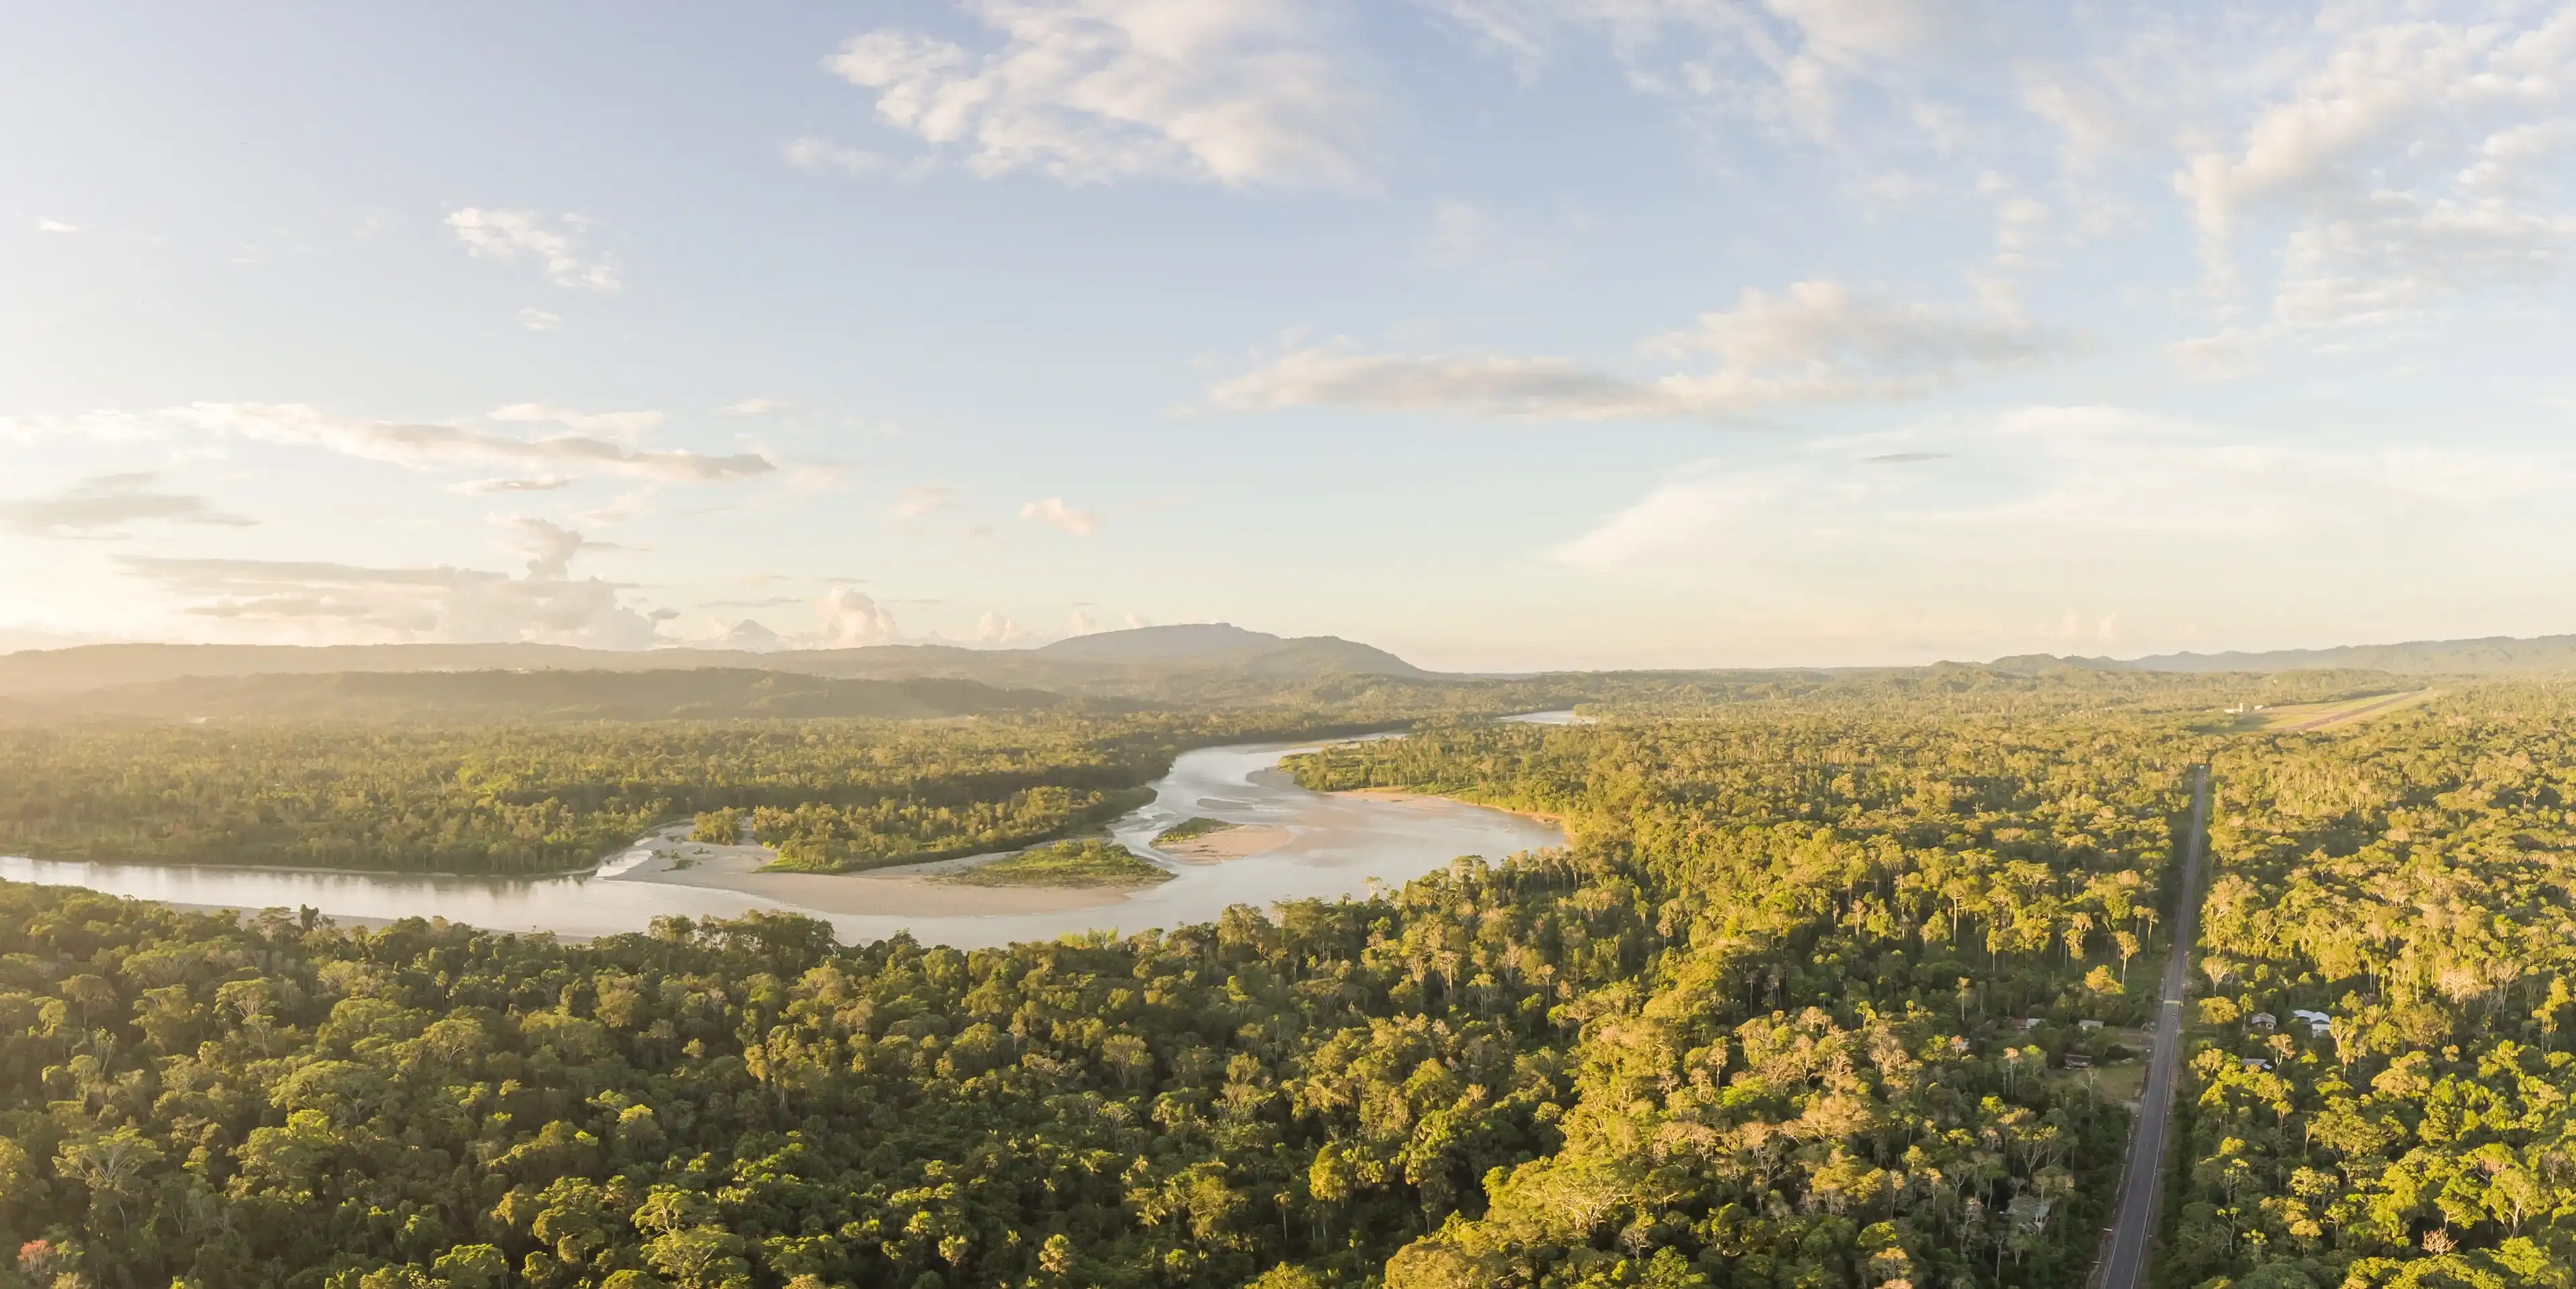 Aerial panorama of an Amazonian highway in Ecuador at dusk with Rio Napo and Galeras mountain in the background. Roads bring colonization and destruction of the rainforest to the Amazon Basin.